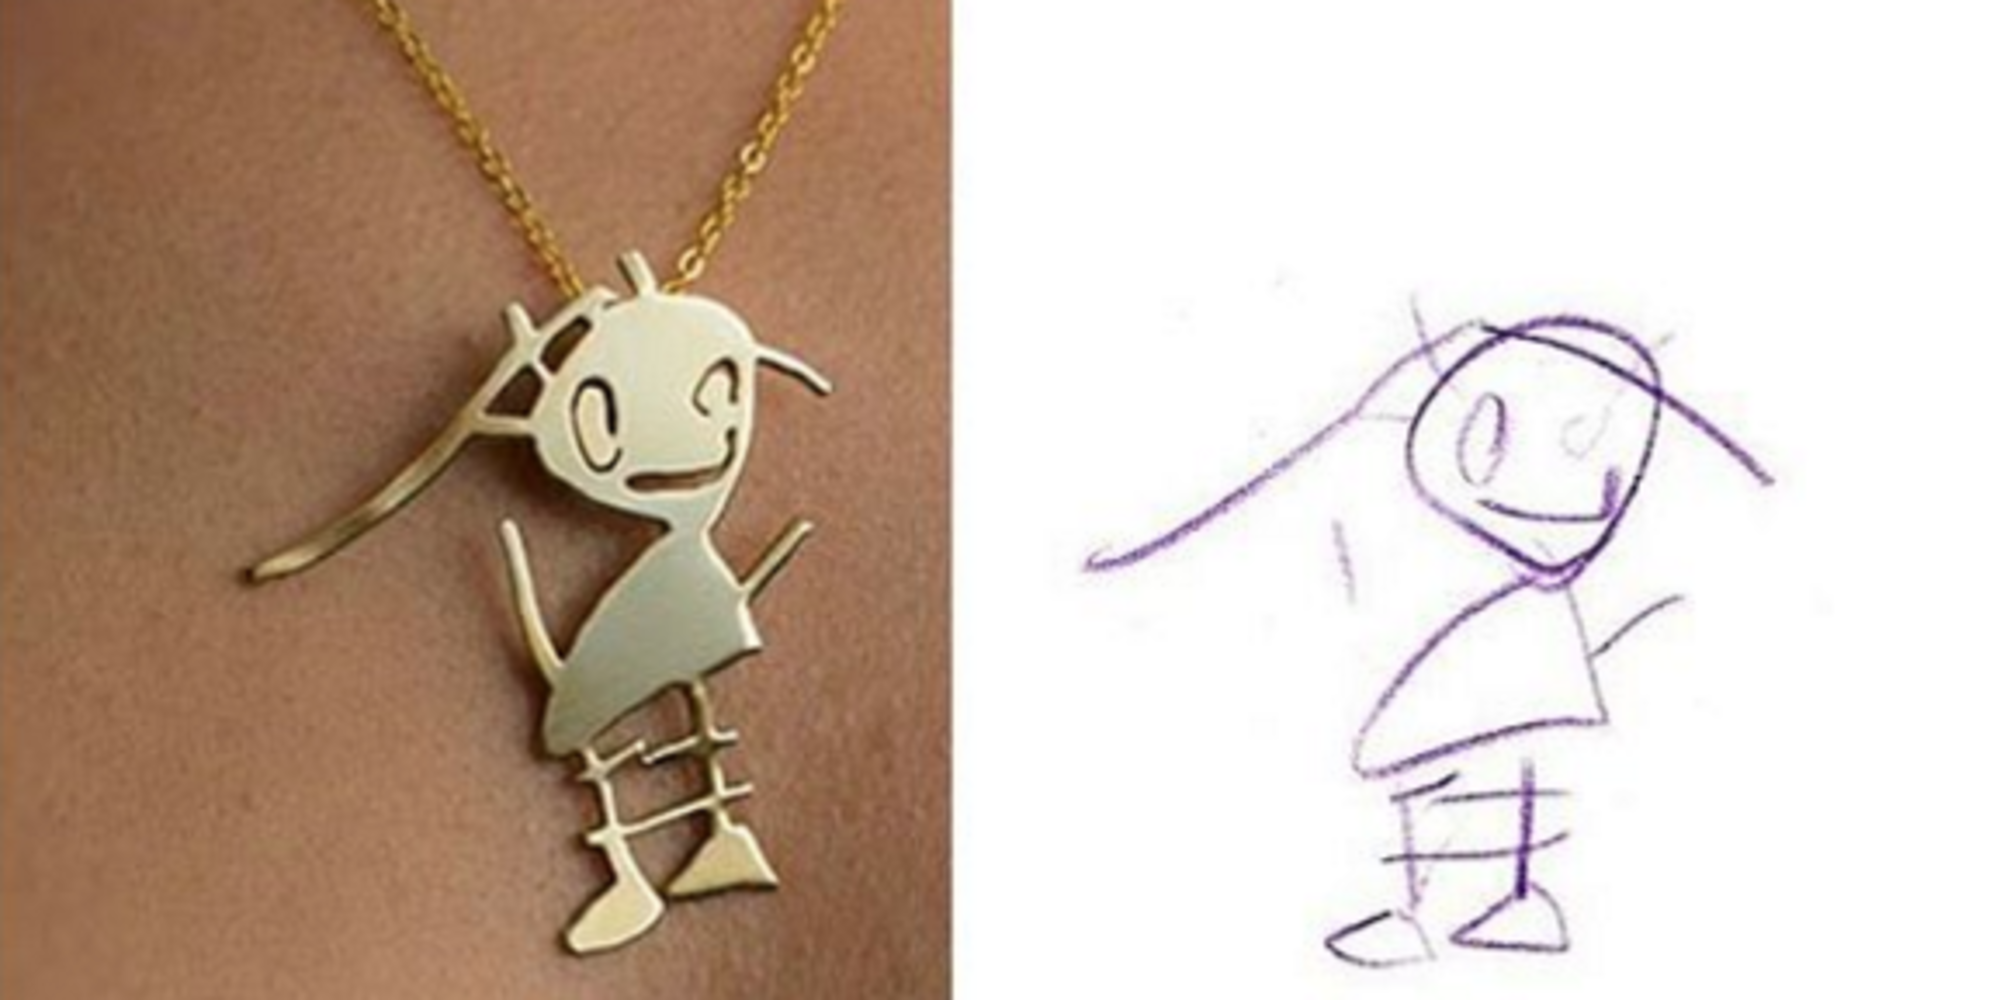 gold necklace featuring child's drawing superimposed next to the actual drawing